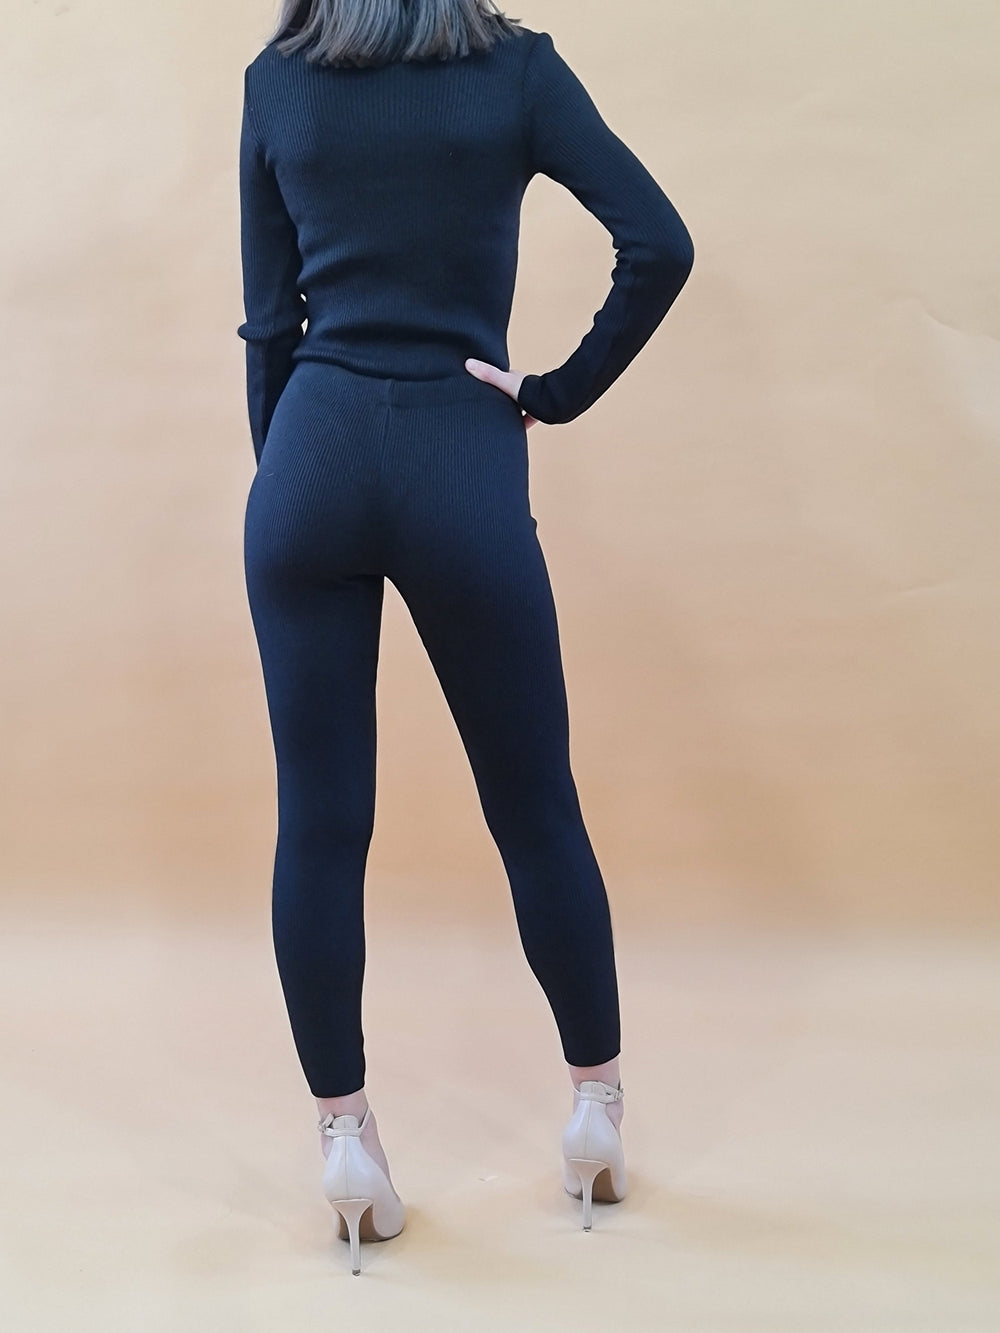 Woman in a black sweater and leggings posing against a beige background